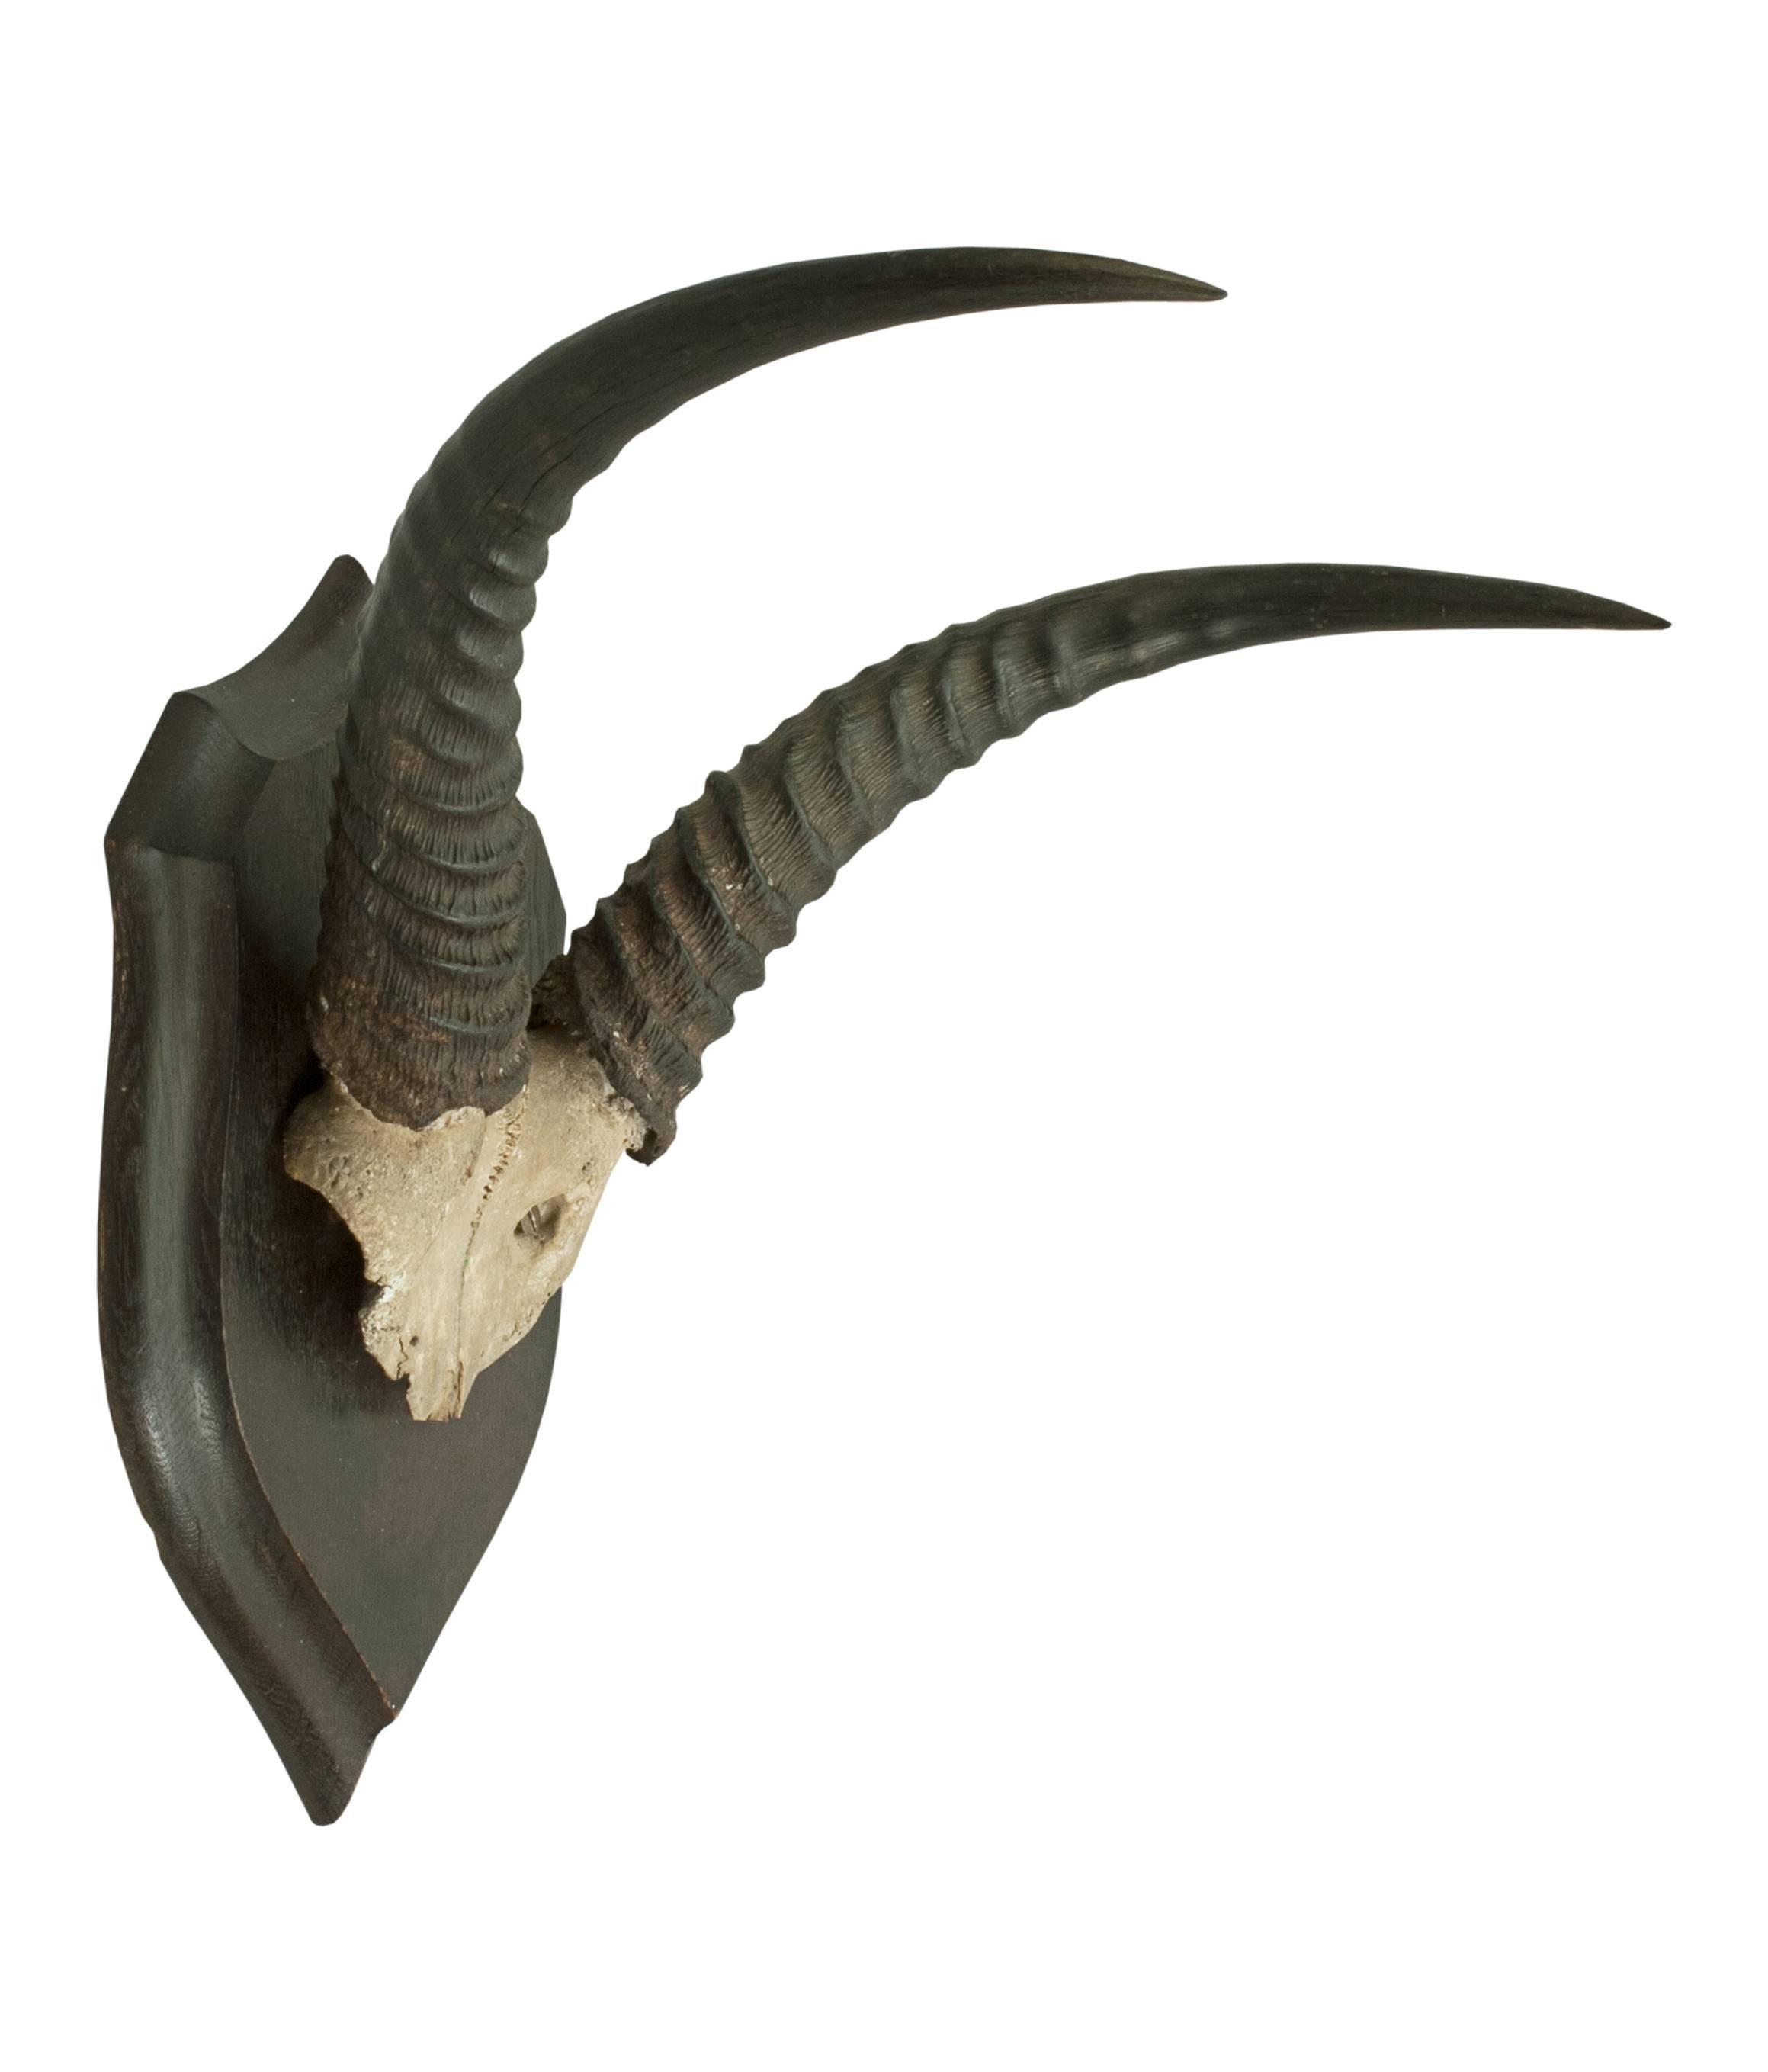 An excellent mounted antelope skull cap and horns by the renowned British taxidermist, Rowland Ward of, The Jungle, Piccadilly, London. The horns are mounted onto a polished shaped oak shield. The rear with carved 'R.W.' and a Rowland Ward's 167